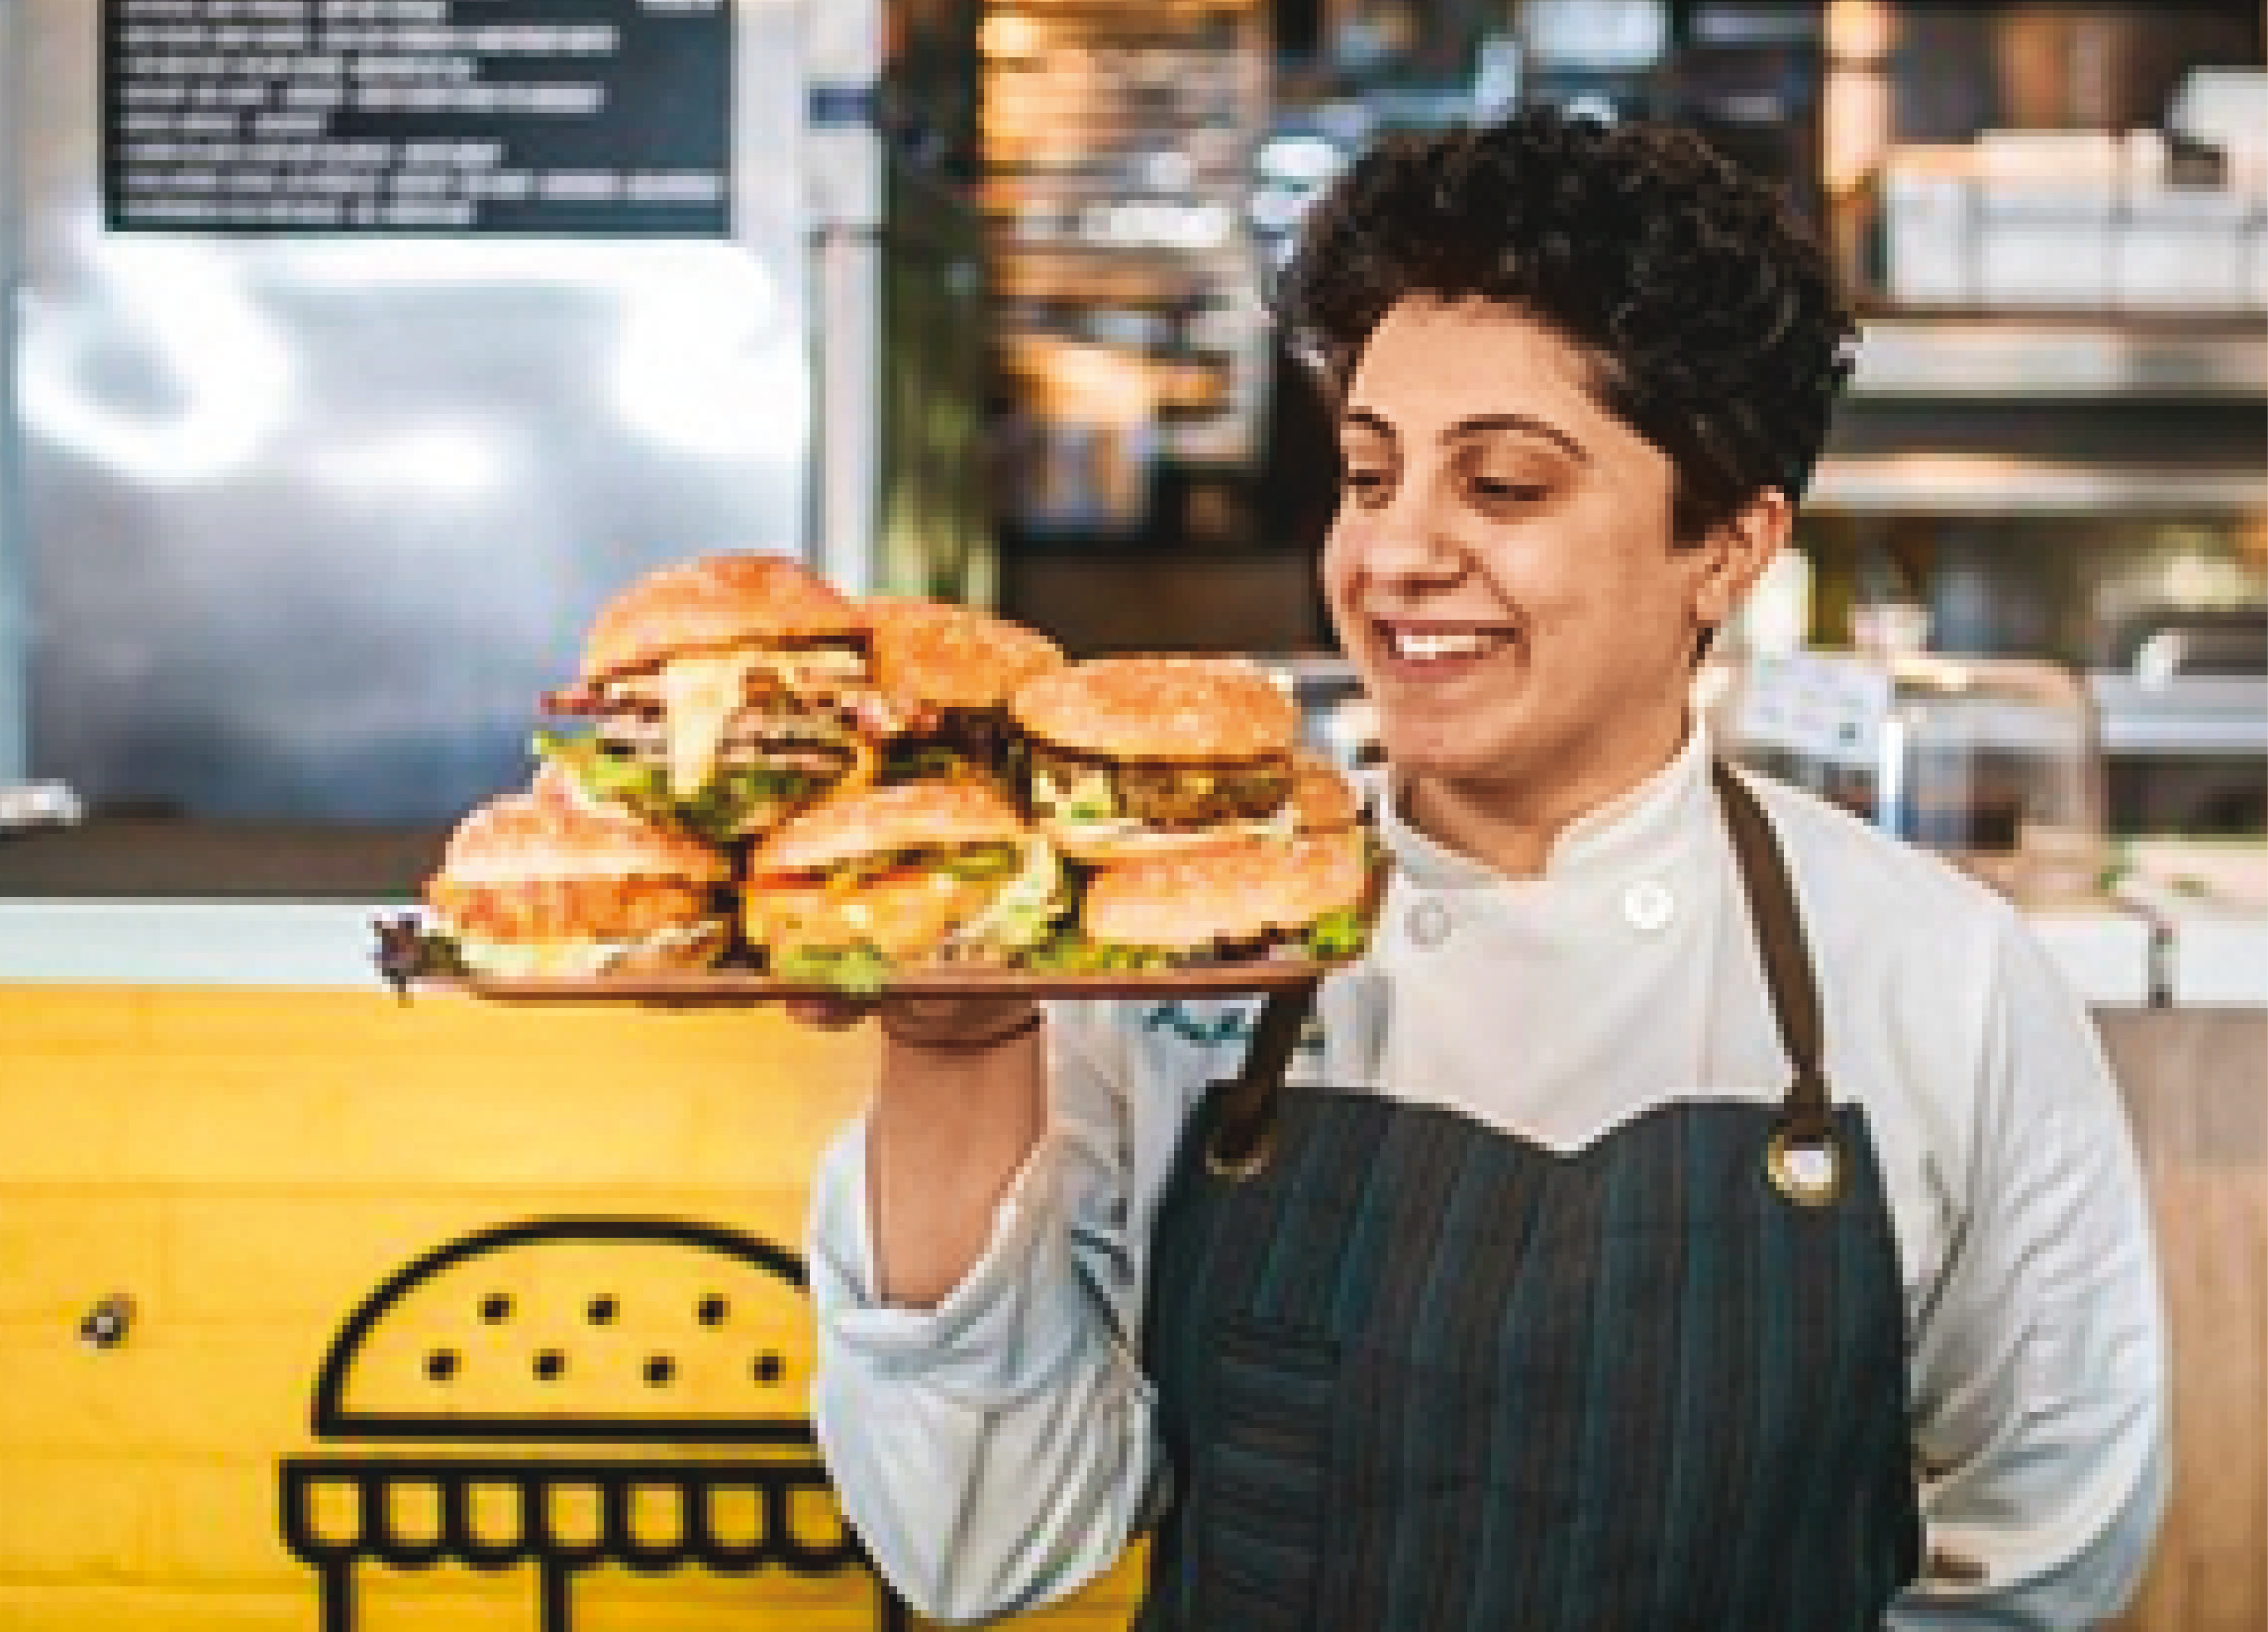 Aku’s – The Brrgrr Co.’s burger buns, made by a home chef, are created firmer on the owner Akriti Malhotra’s instructions